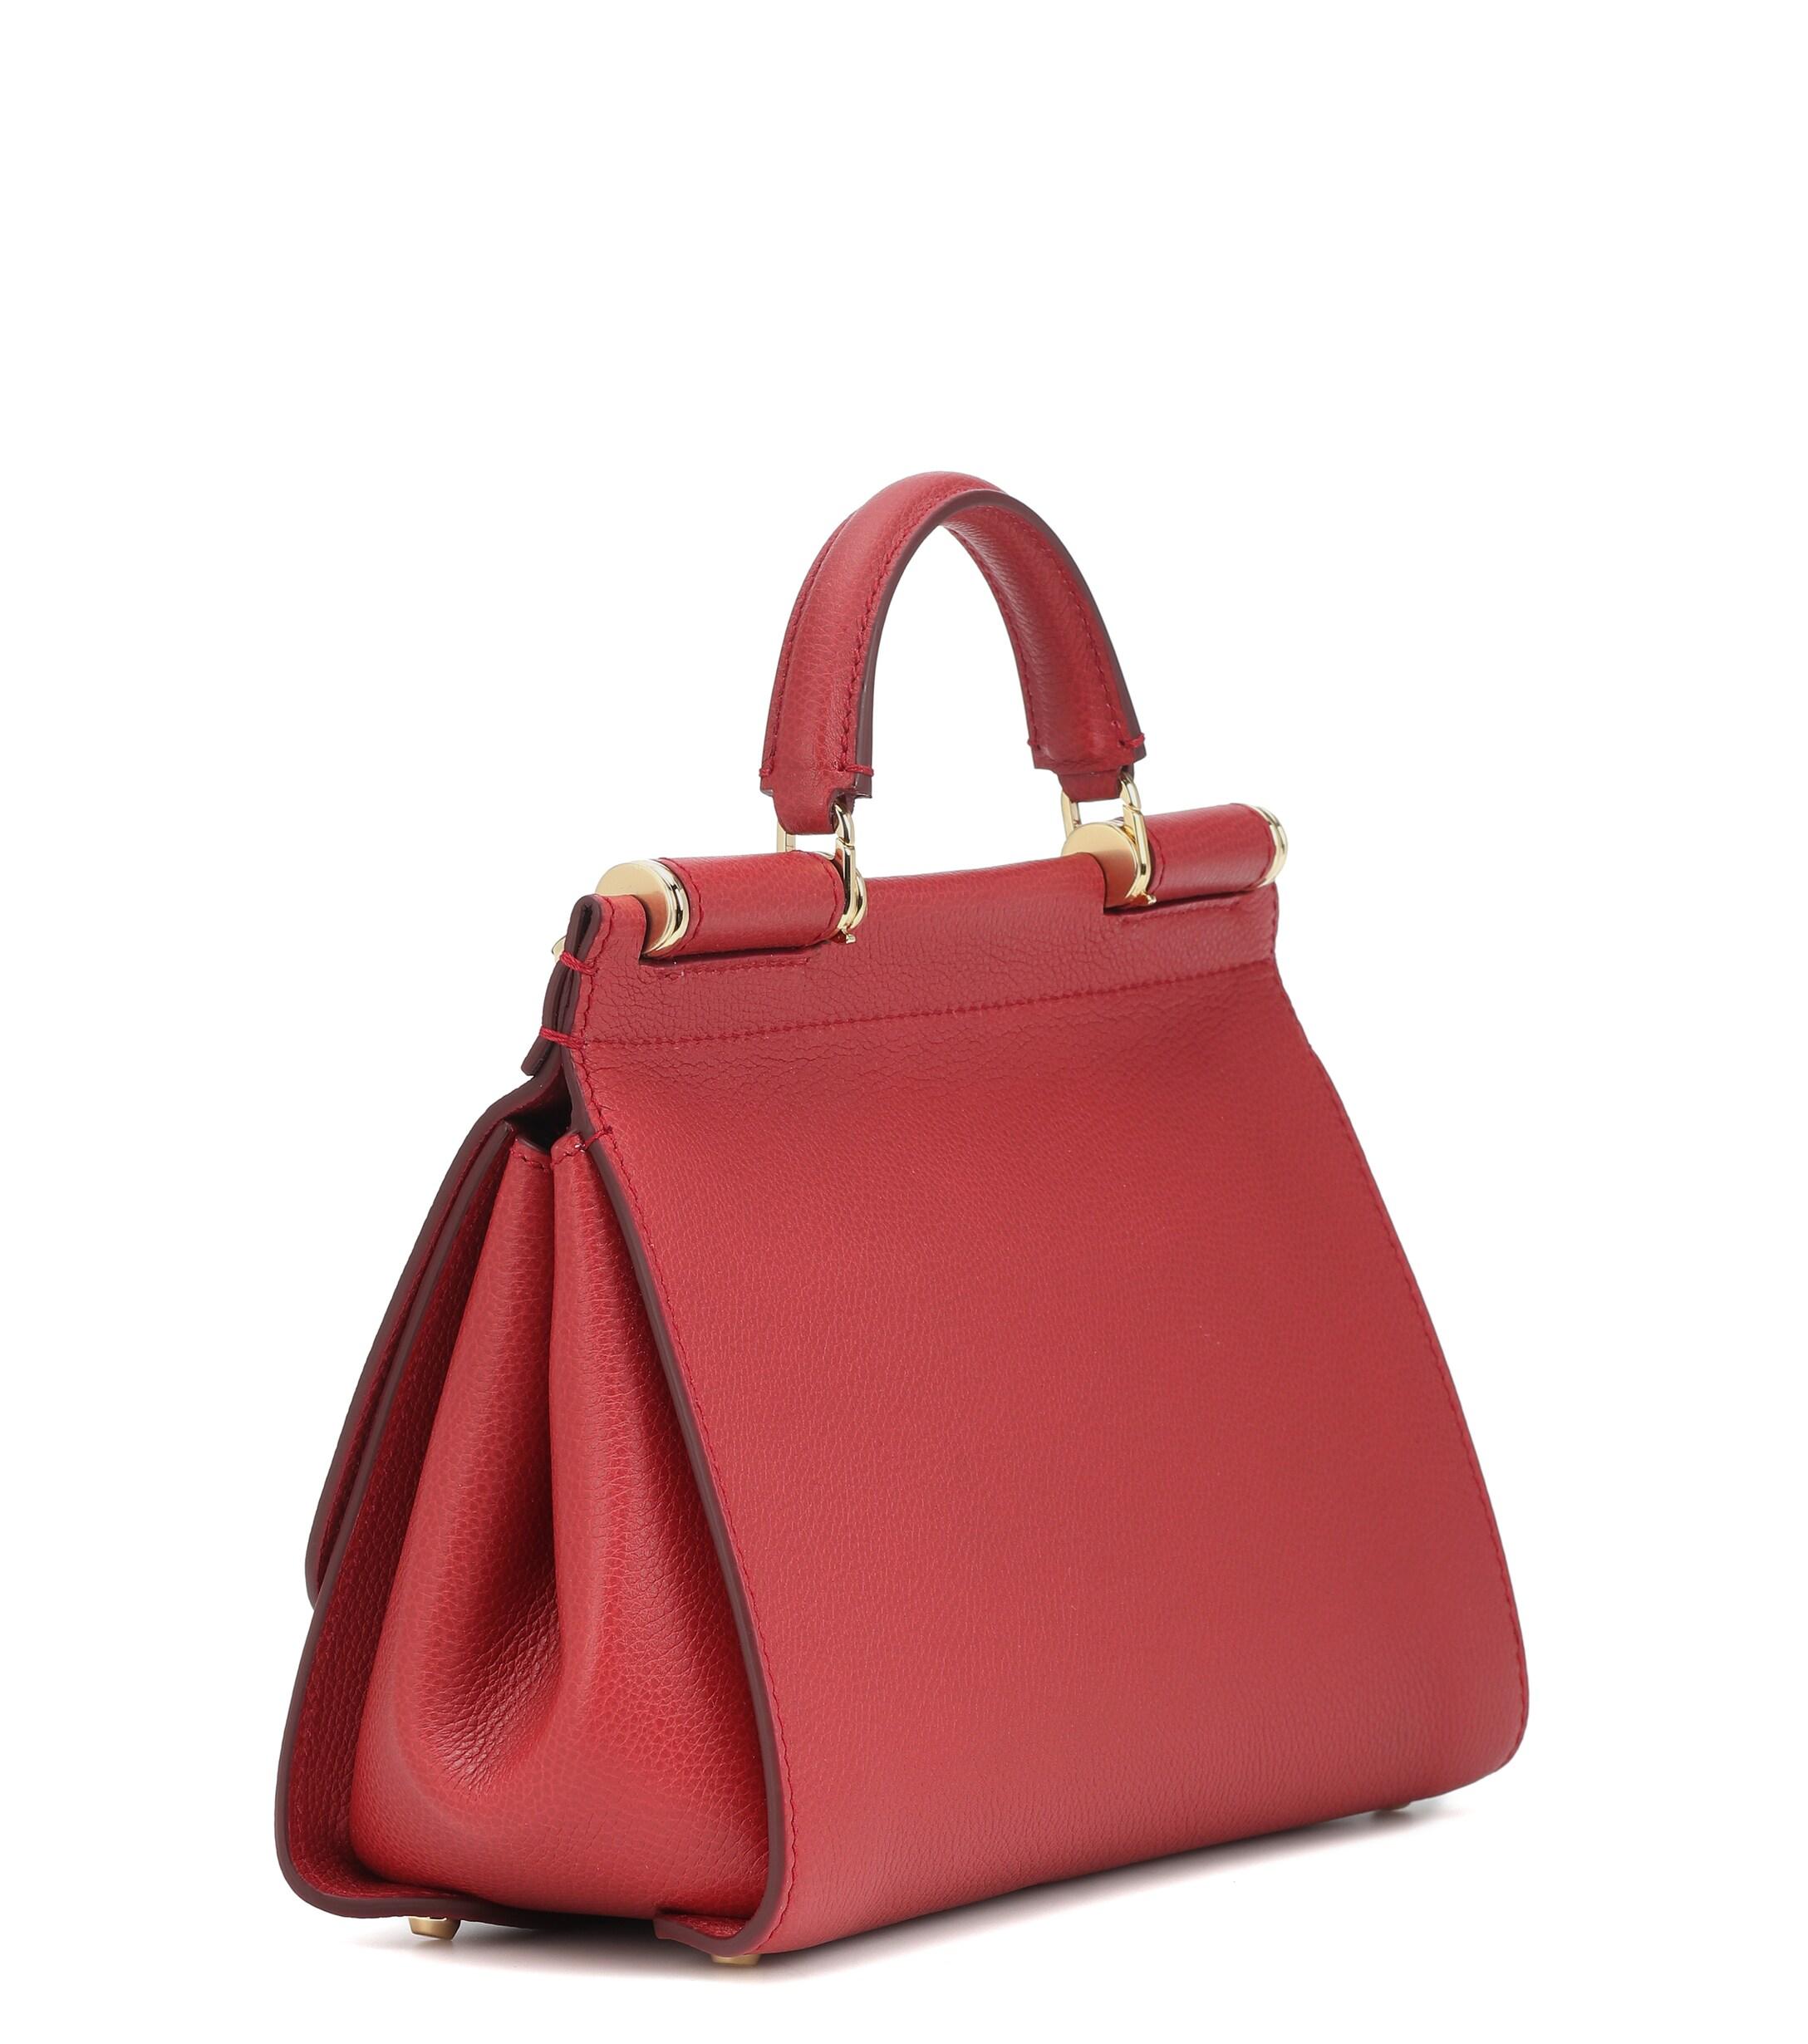 Dolce & Gabbana Sicily Soft Small Leather Shoulder Bag in Red - Lyst